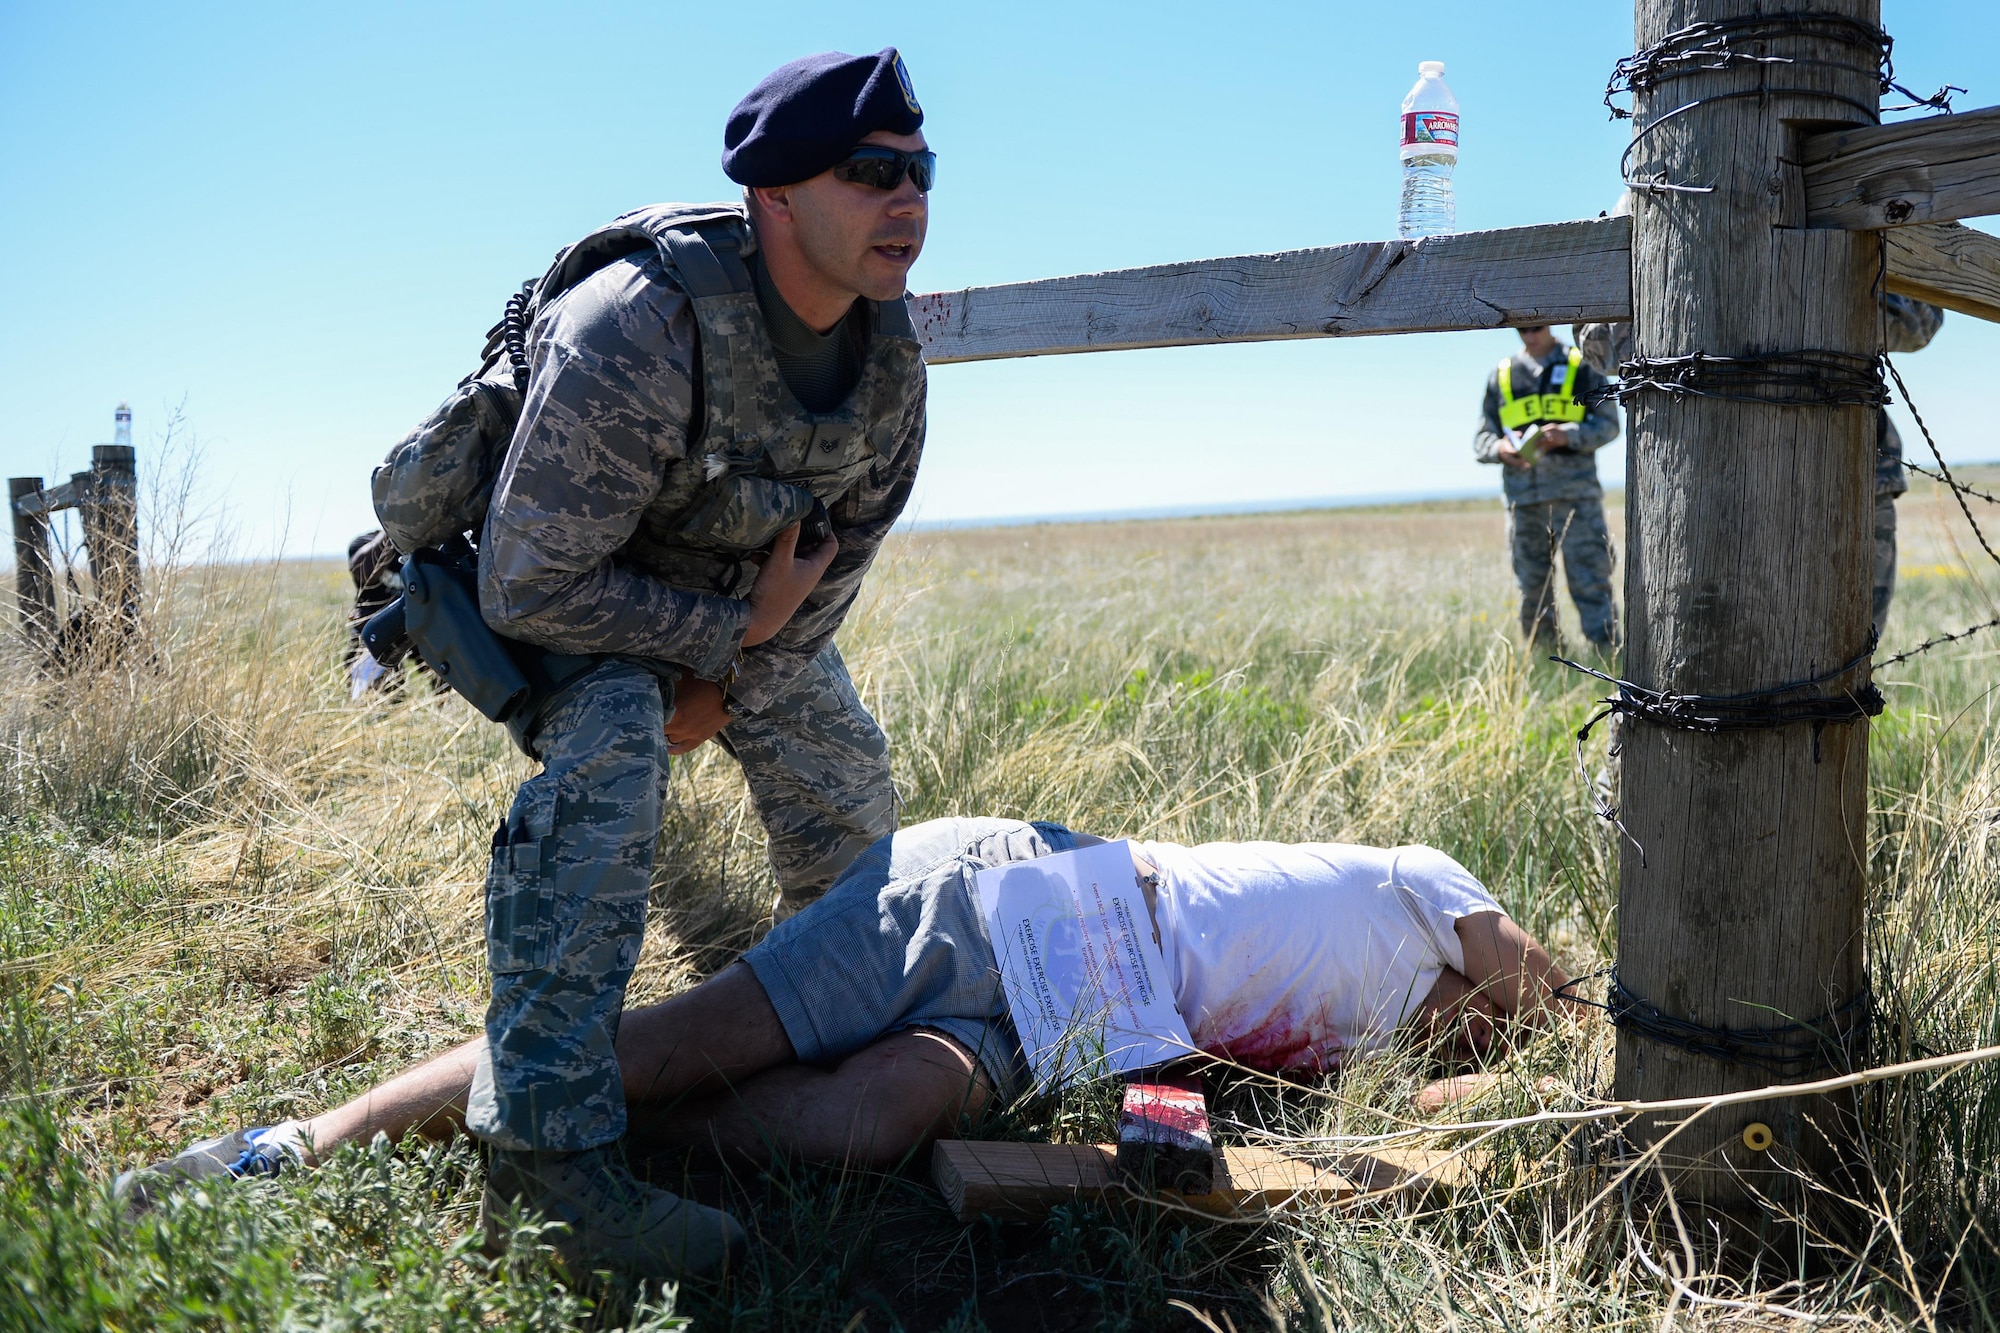 A 50th Security Forces Squadron defender tends to a victim during Opinicus Vista 16-2, a base exercise at Schriever Air Force Base, Colorado, Wednesday, June 15, 2016. Airmen played the part of victims to create realistic exercises. (U.S. Air Force photo/Christopher DeWitt)